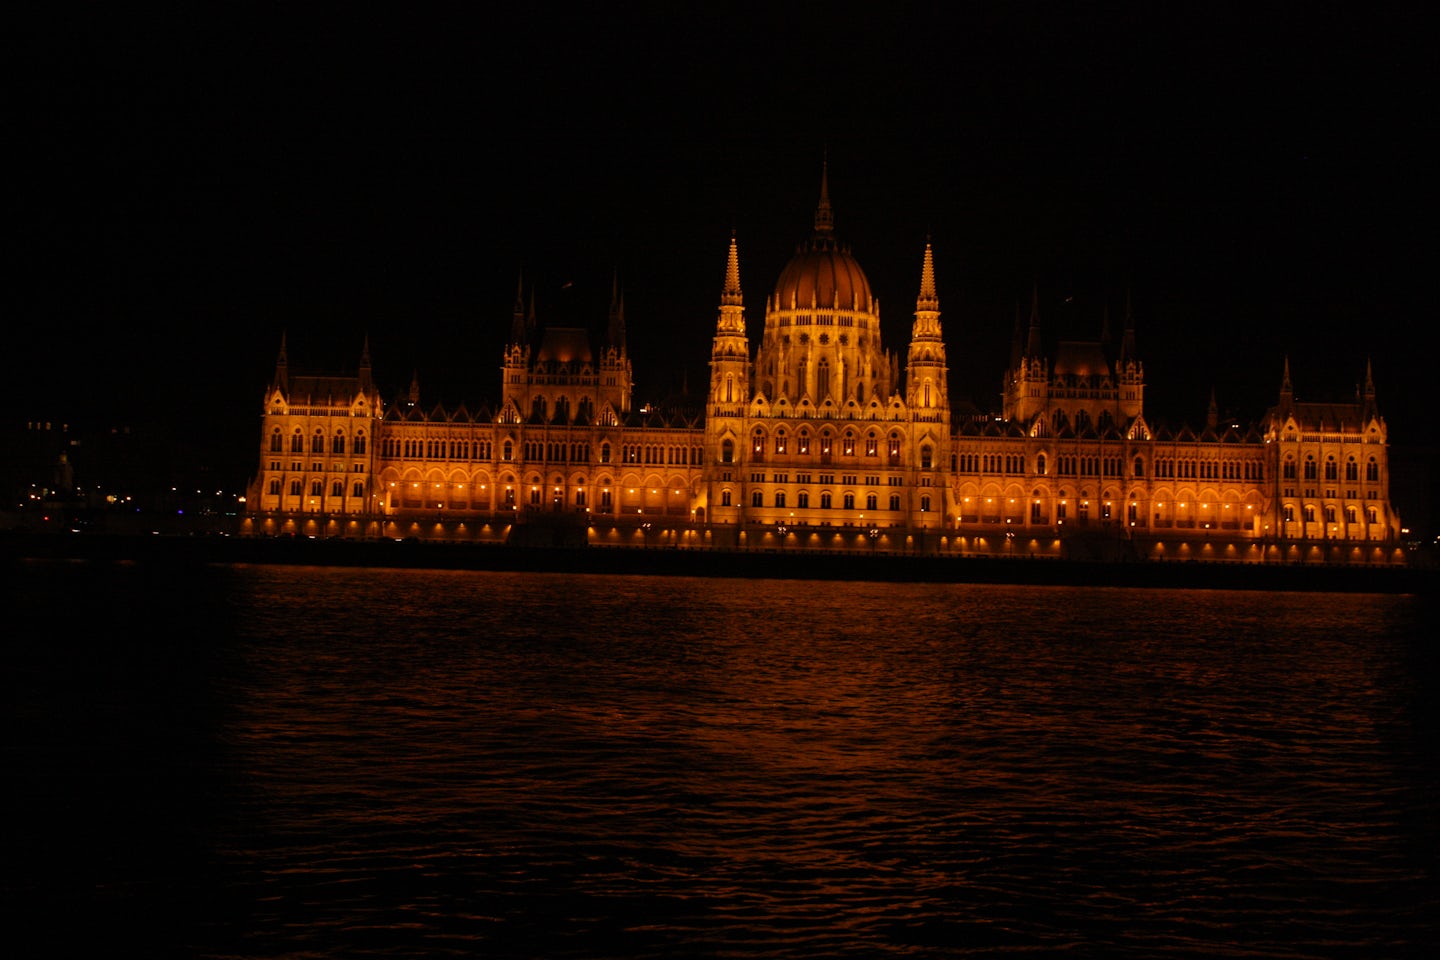 Budapest parliament in the evening.